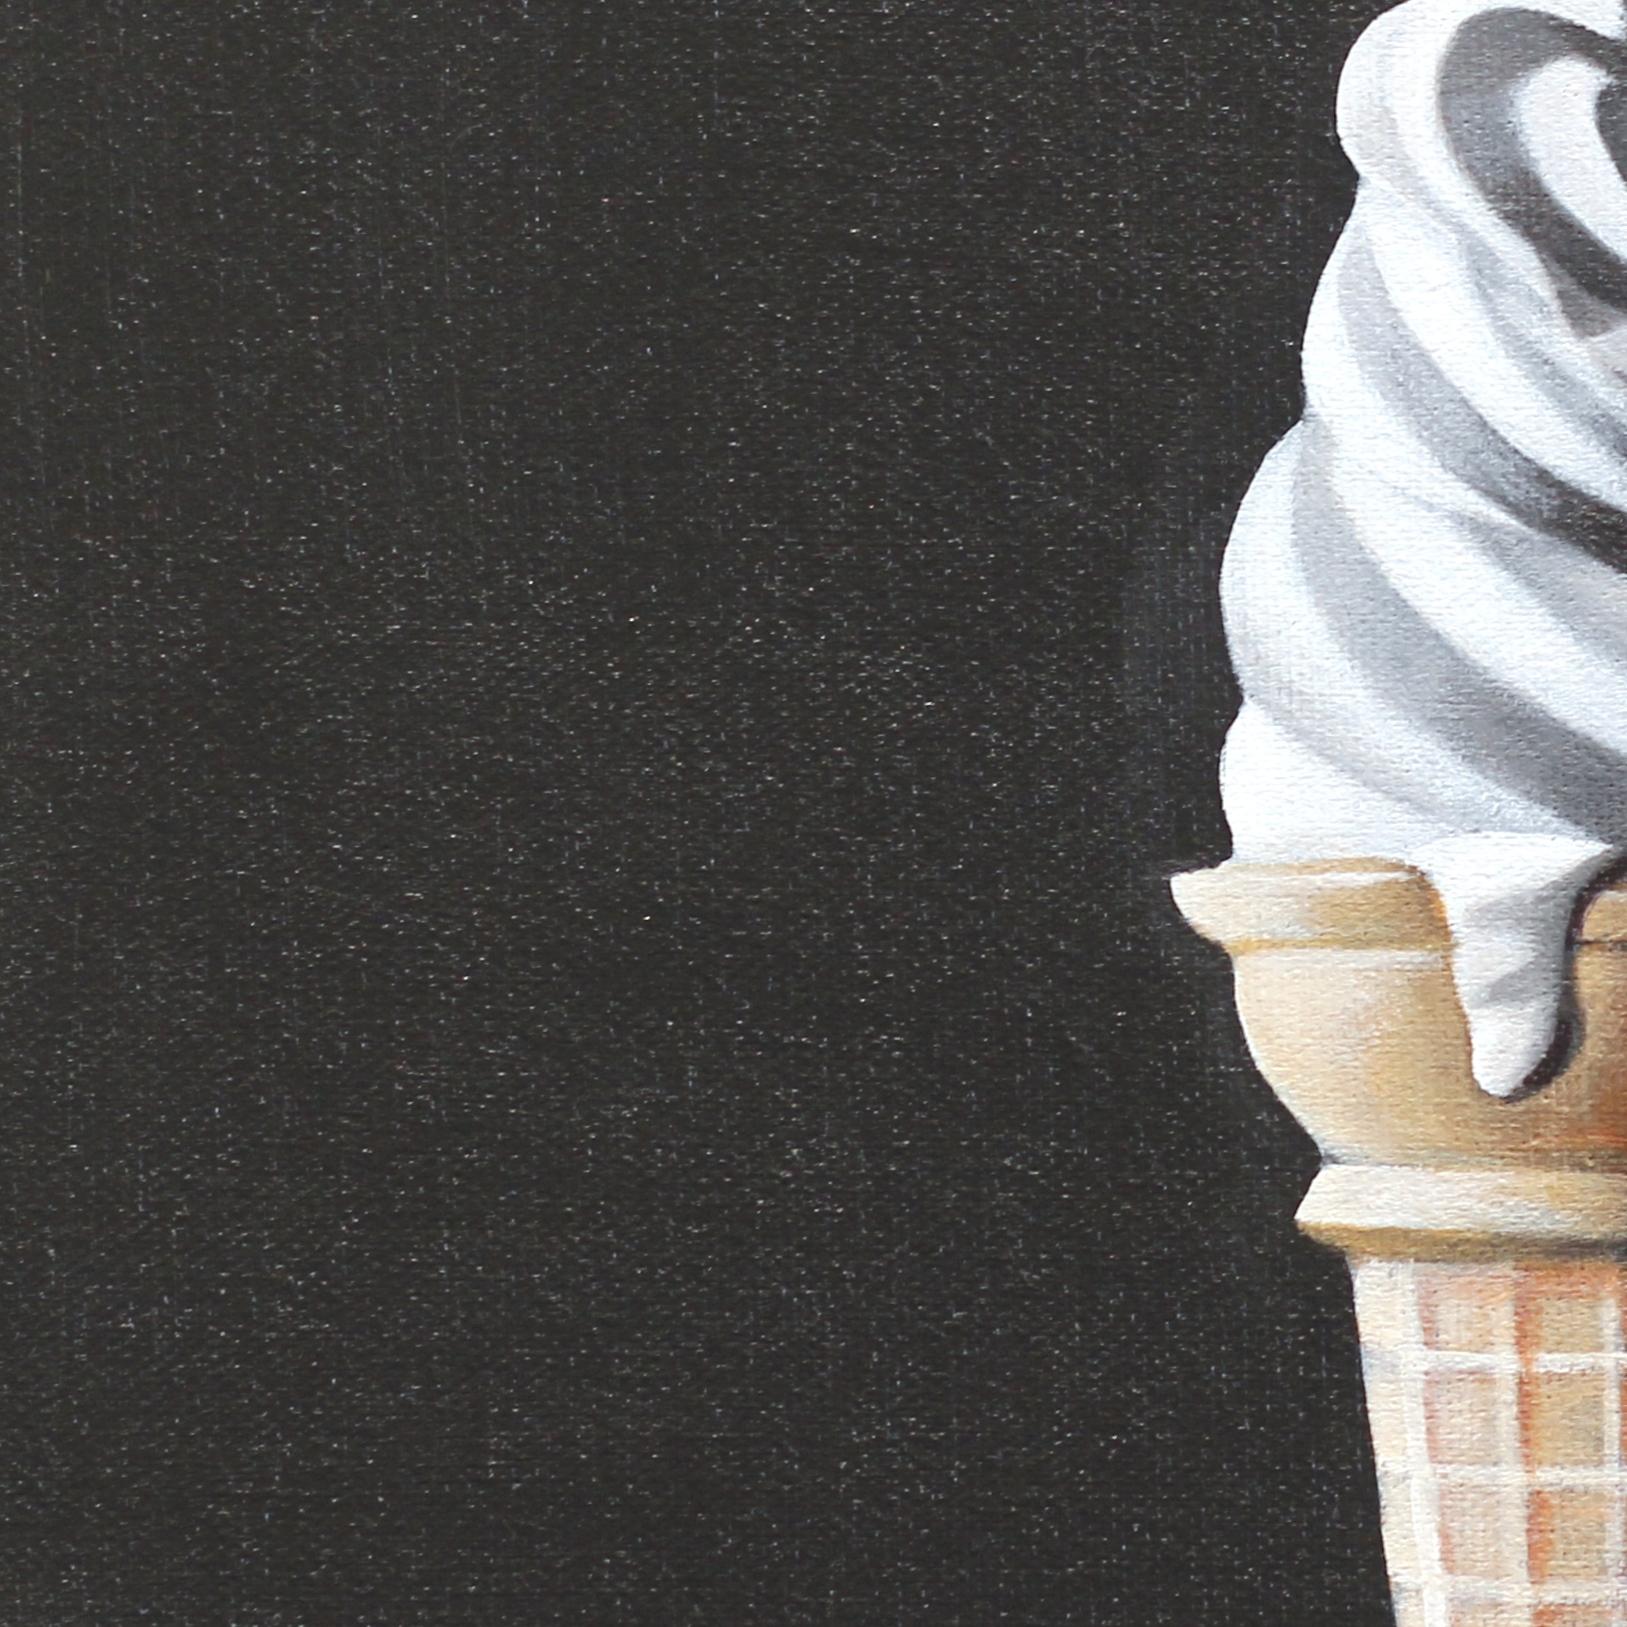 Soft Serve - Photorealist Painting by Erin Rothstein